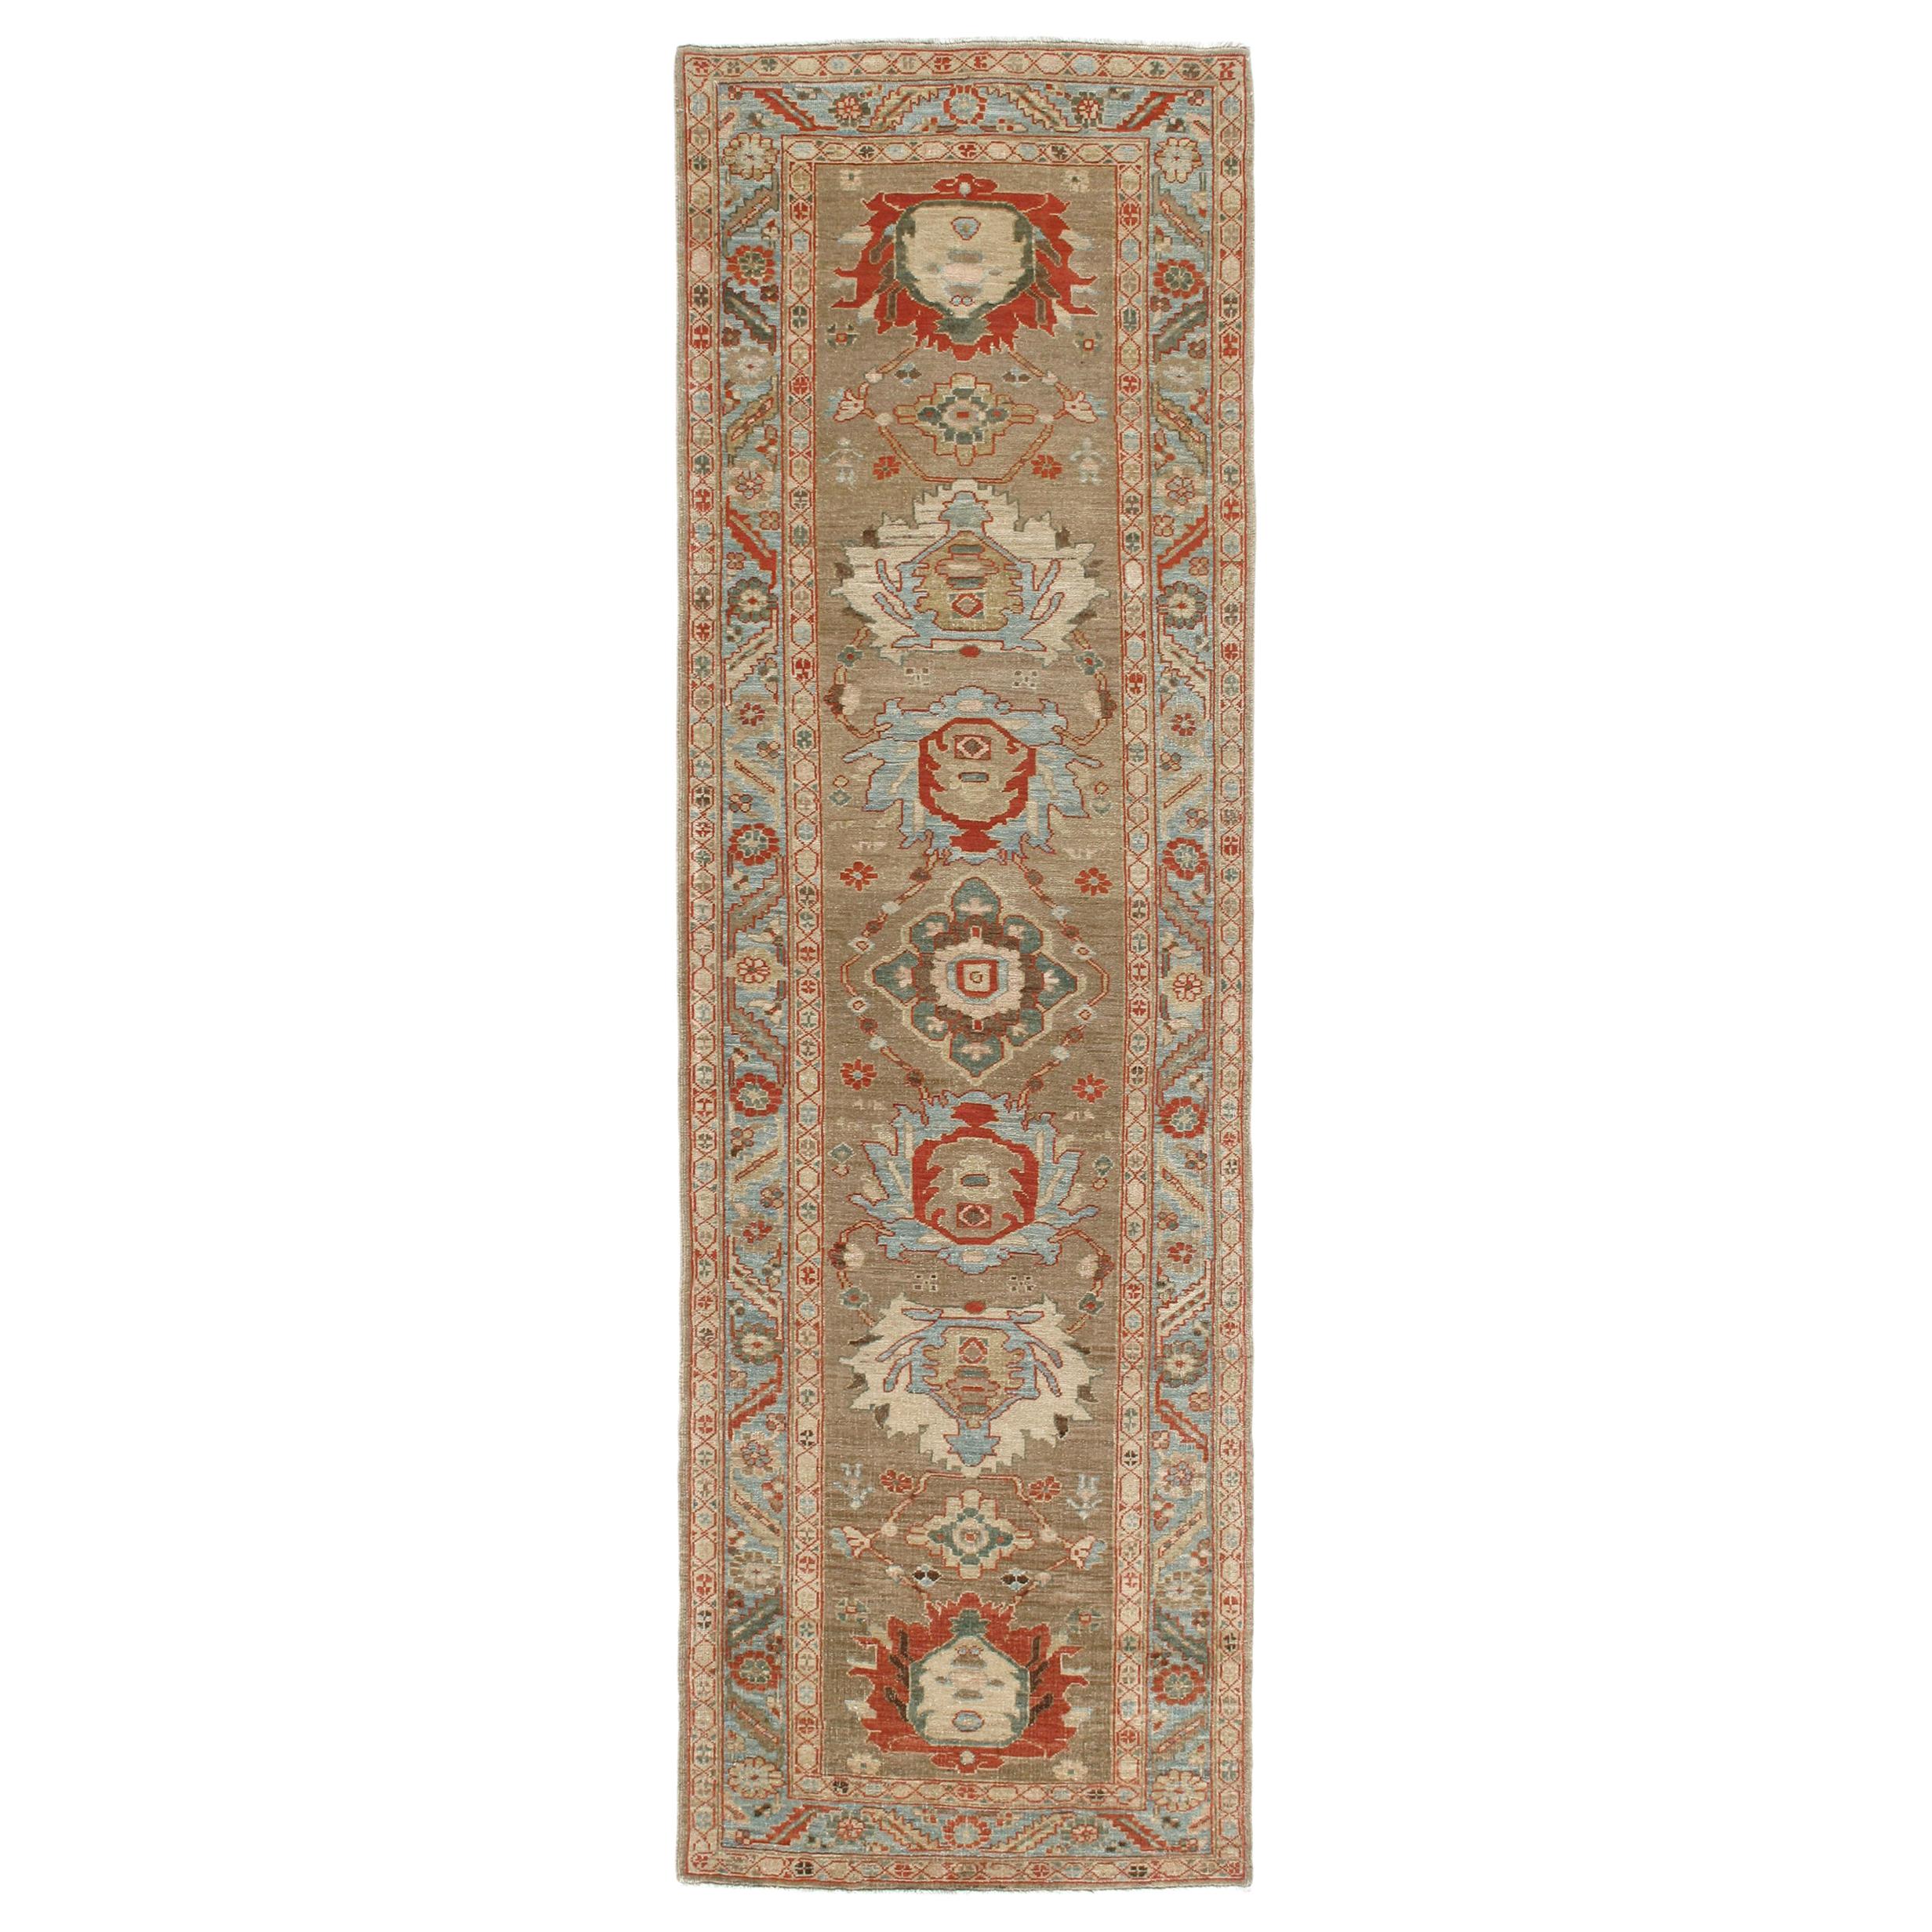 Persian Traditional Bakshaish Hand-Knotted Runner in Camel, Blue, Rust Colors